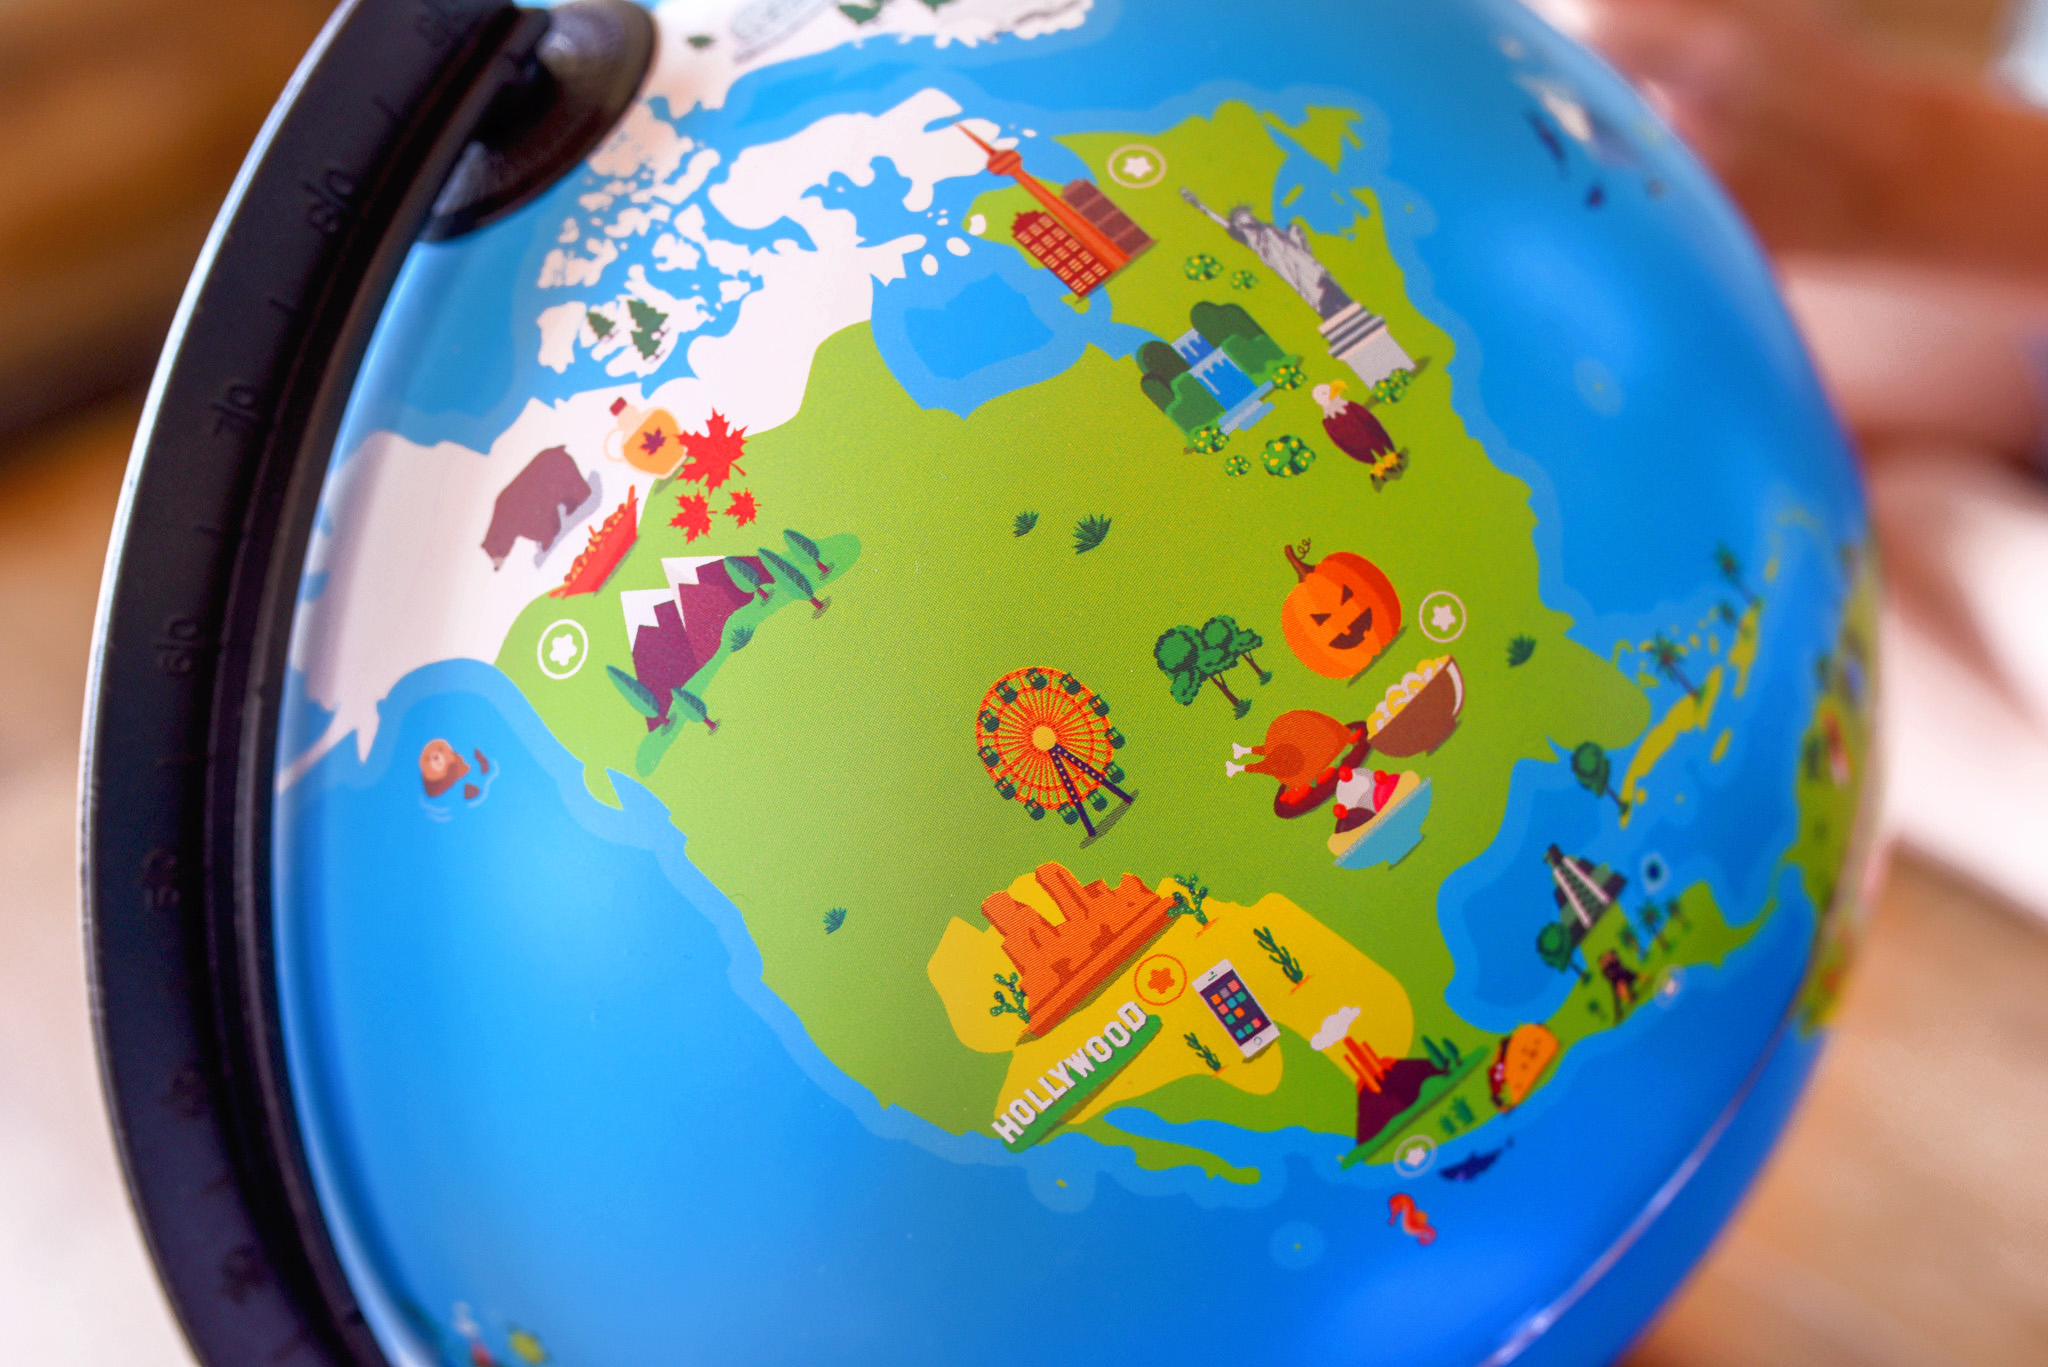 Close up image of the orboot globe